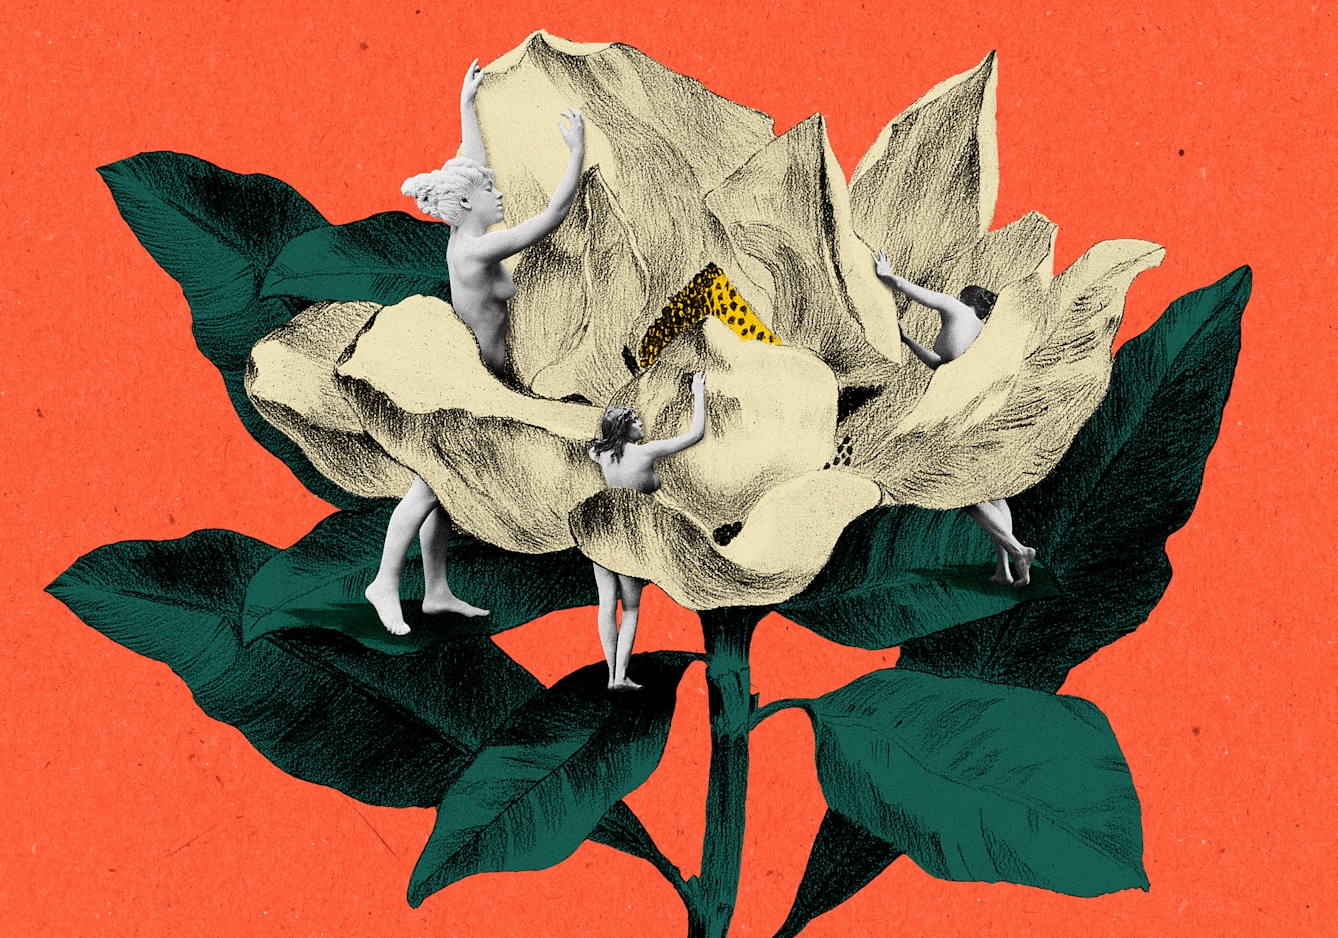 Mixed media collage of three naked women inspecting a large white flower.  The image has been created using a mix of assets and uses white, yellow, red and green tones, sitting on a blood orange background.